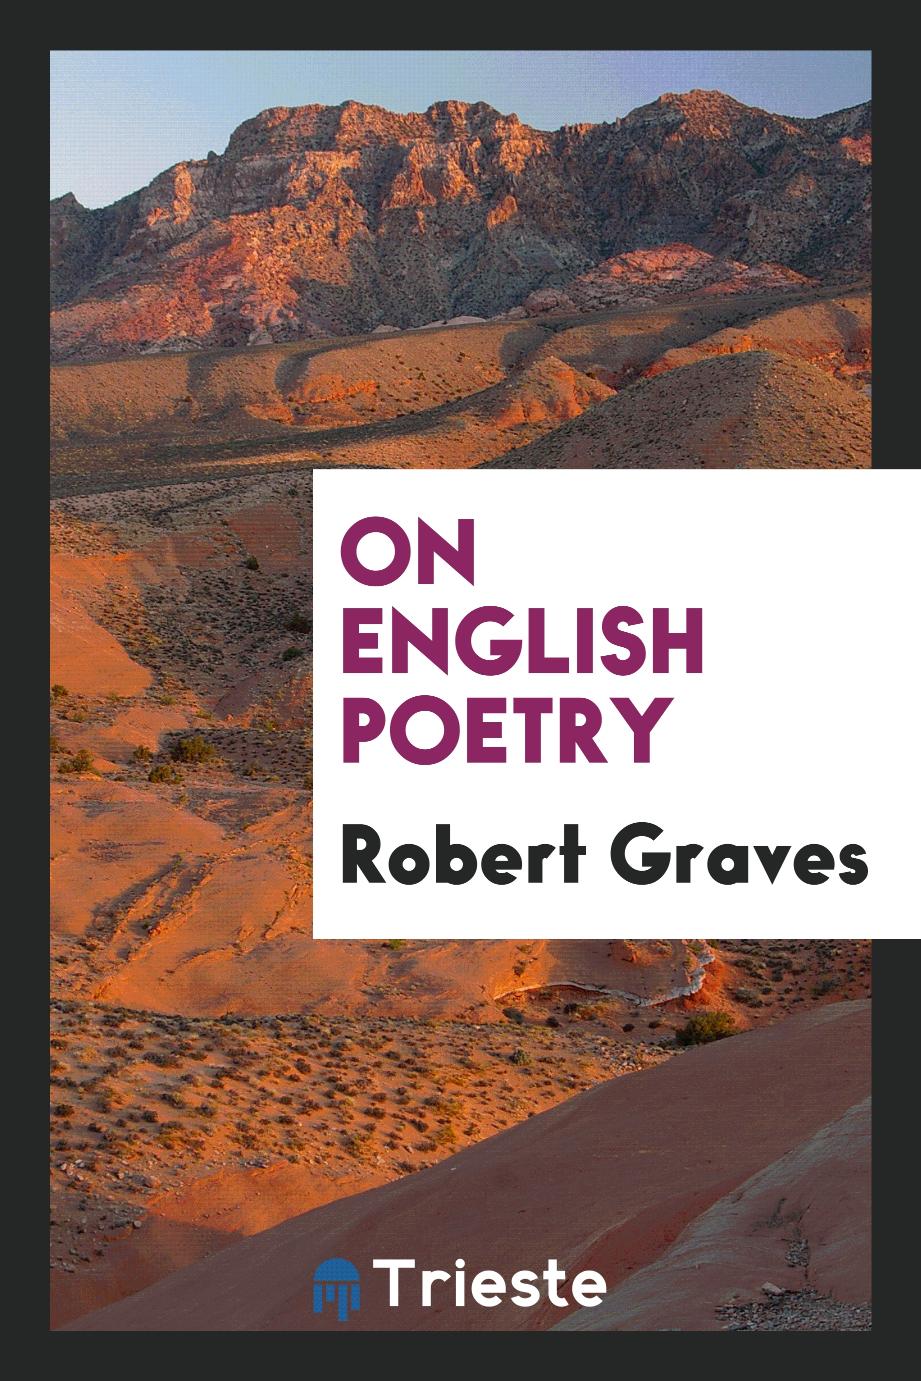 On English poetry